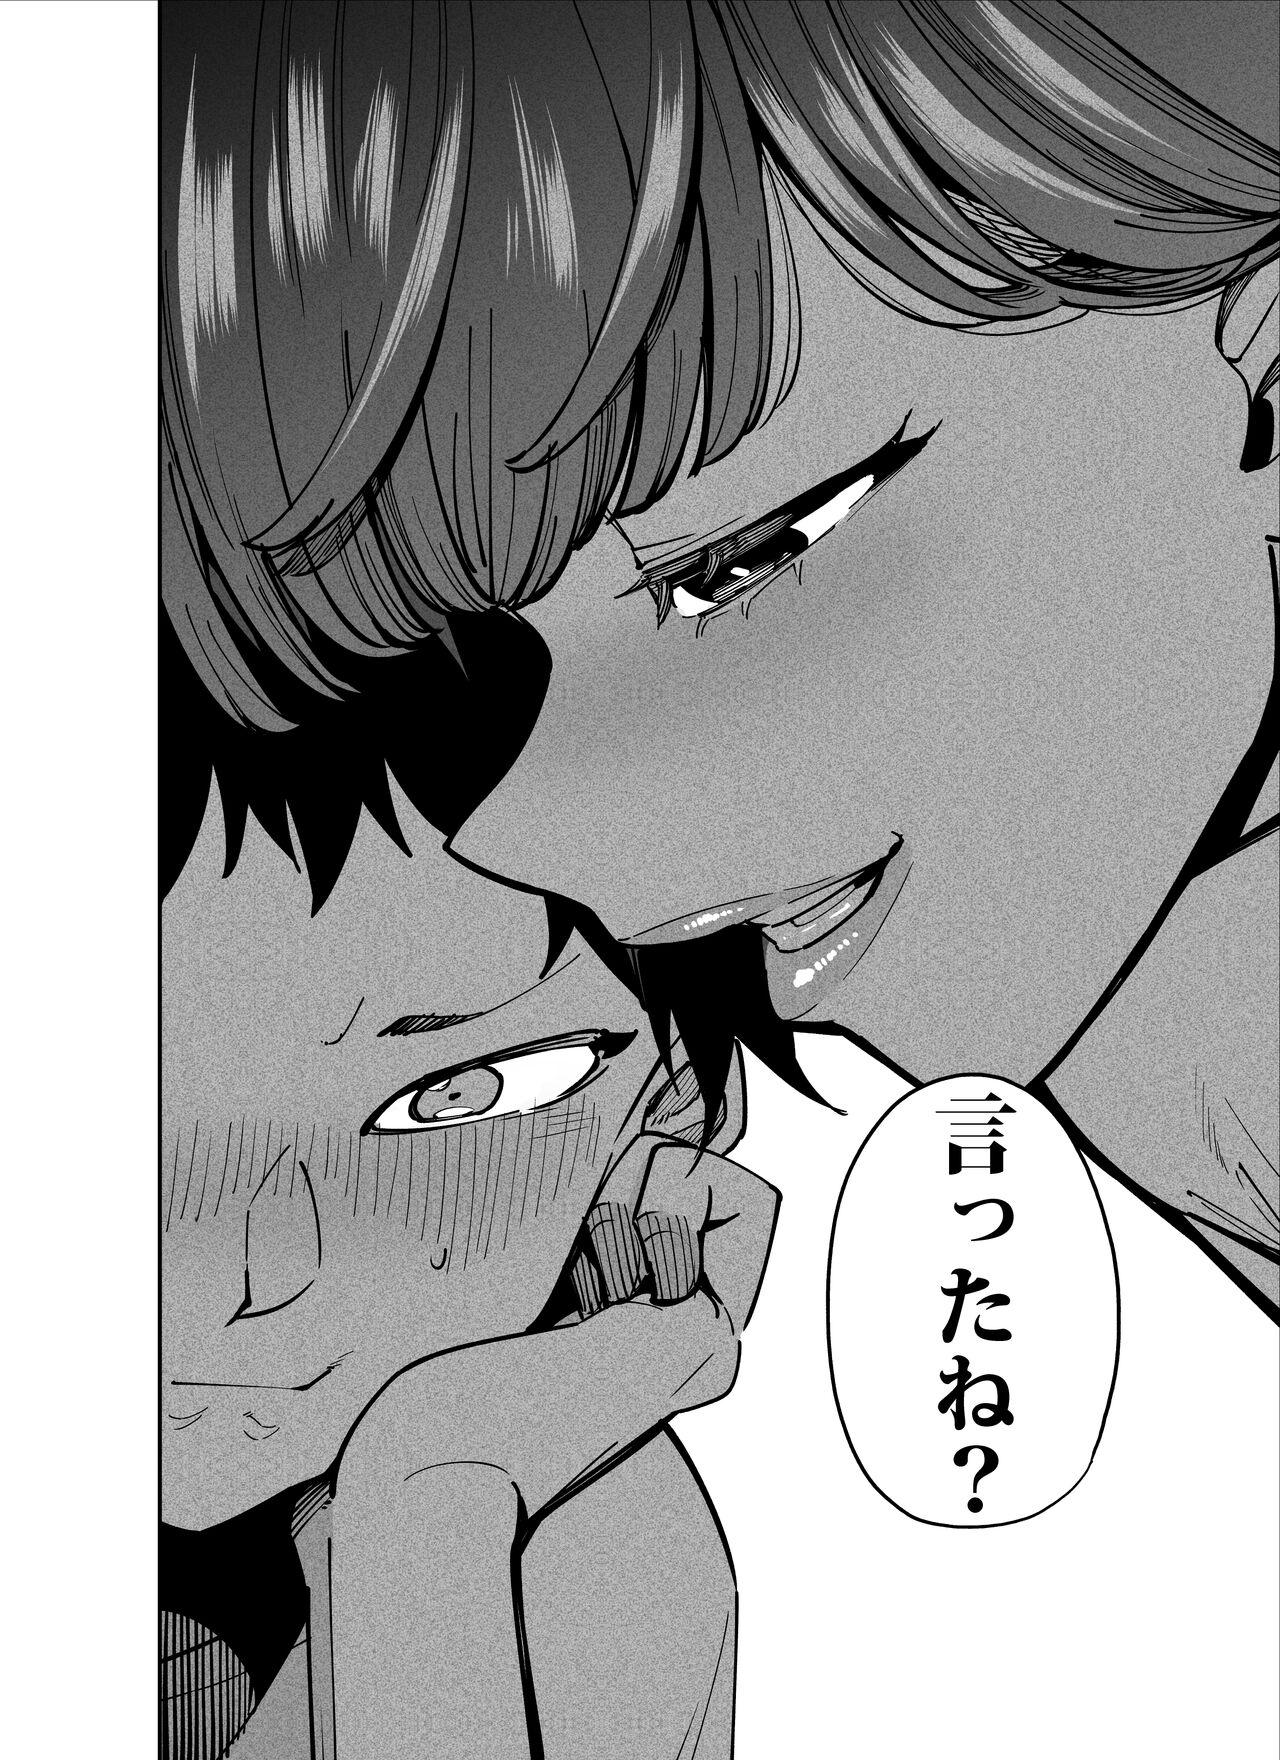 Gayemo 「言ったね？」 Pussy Fingering - Page 3